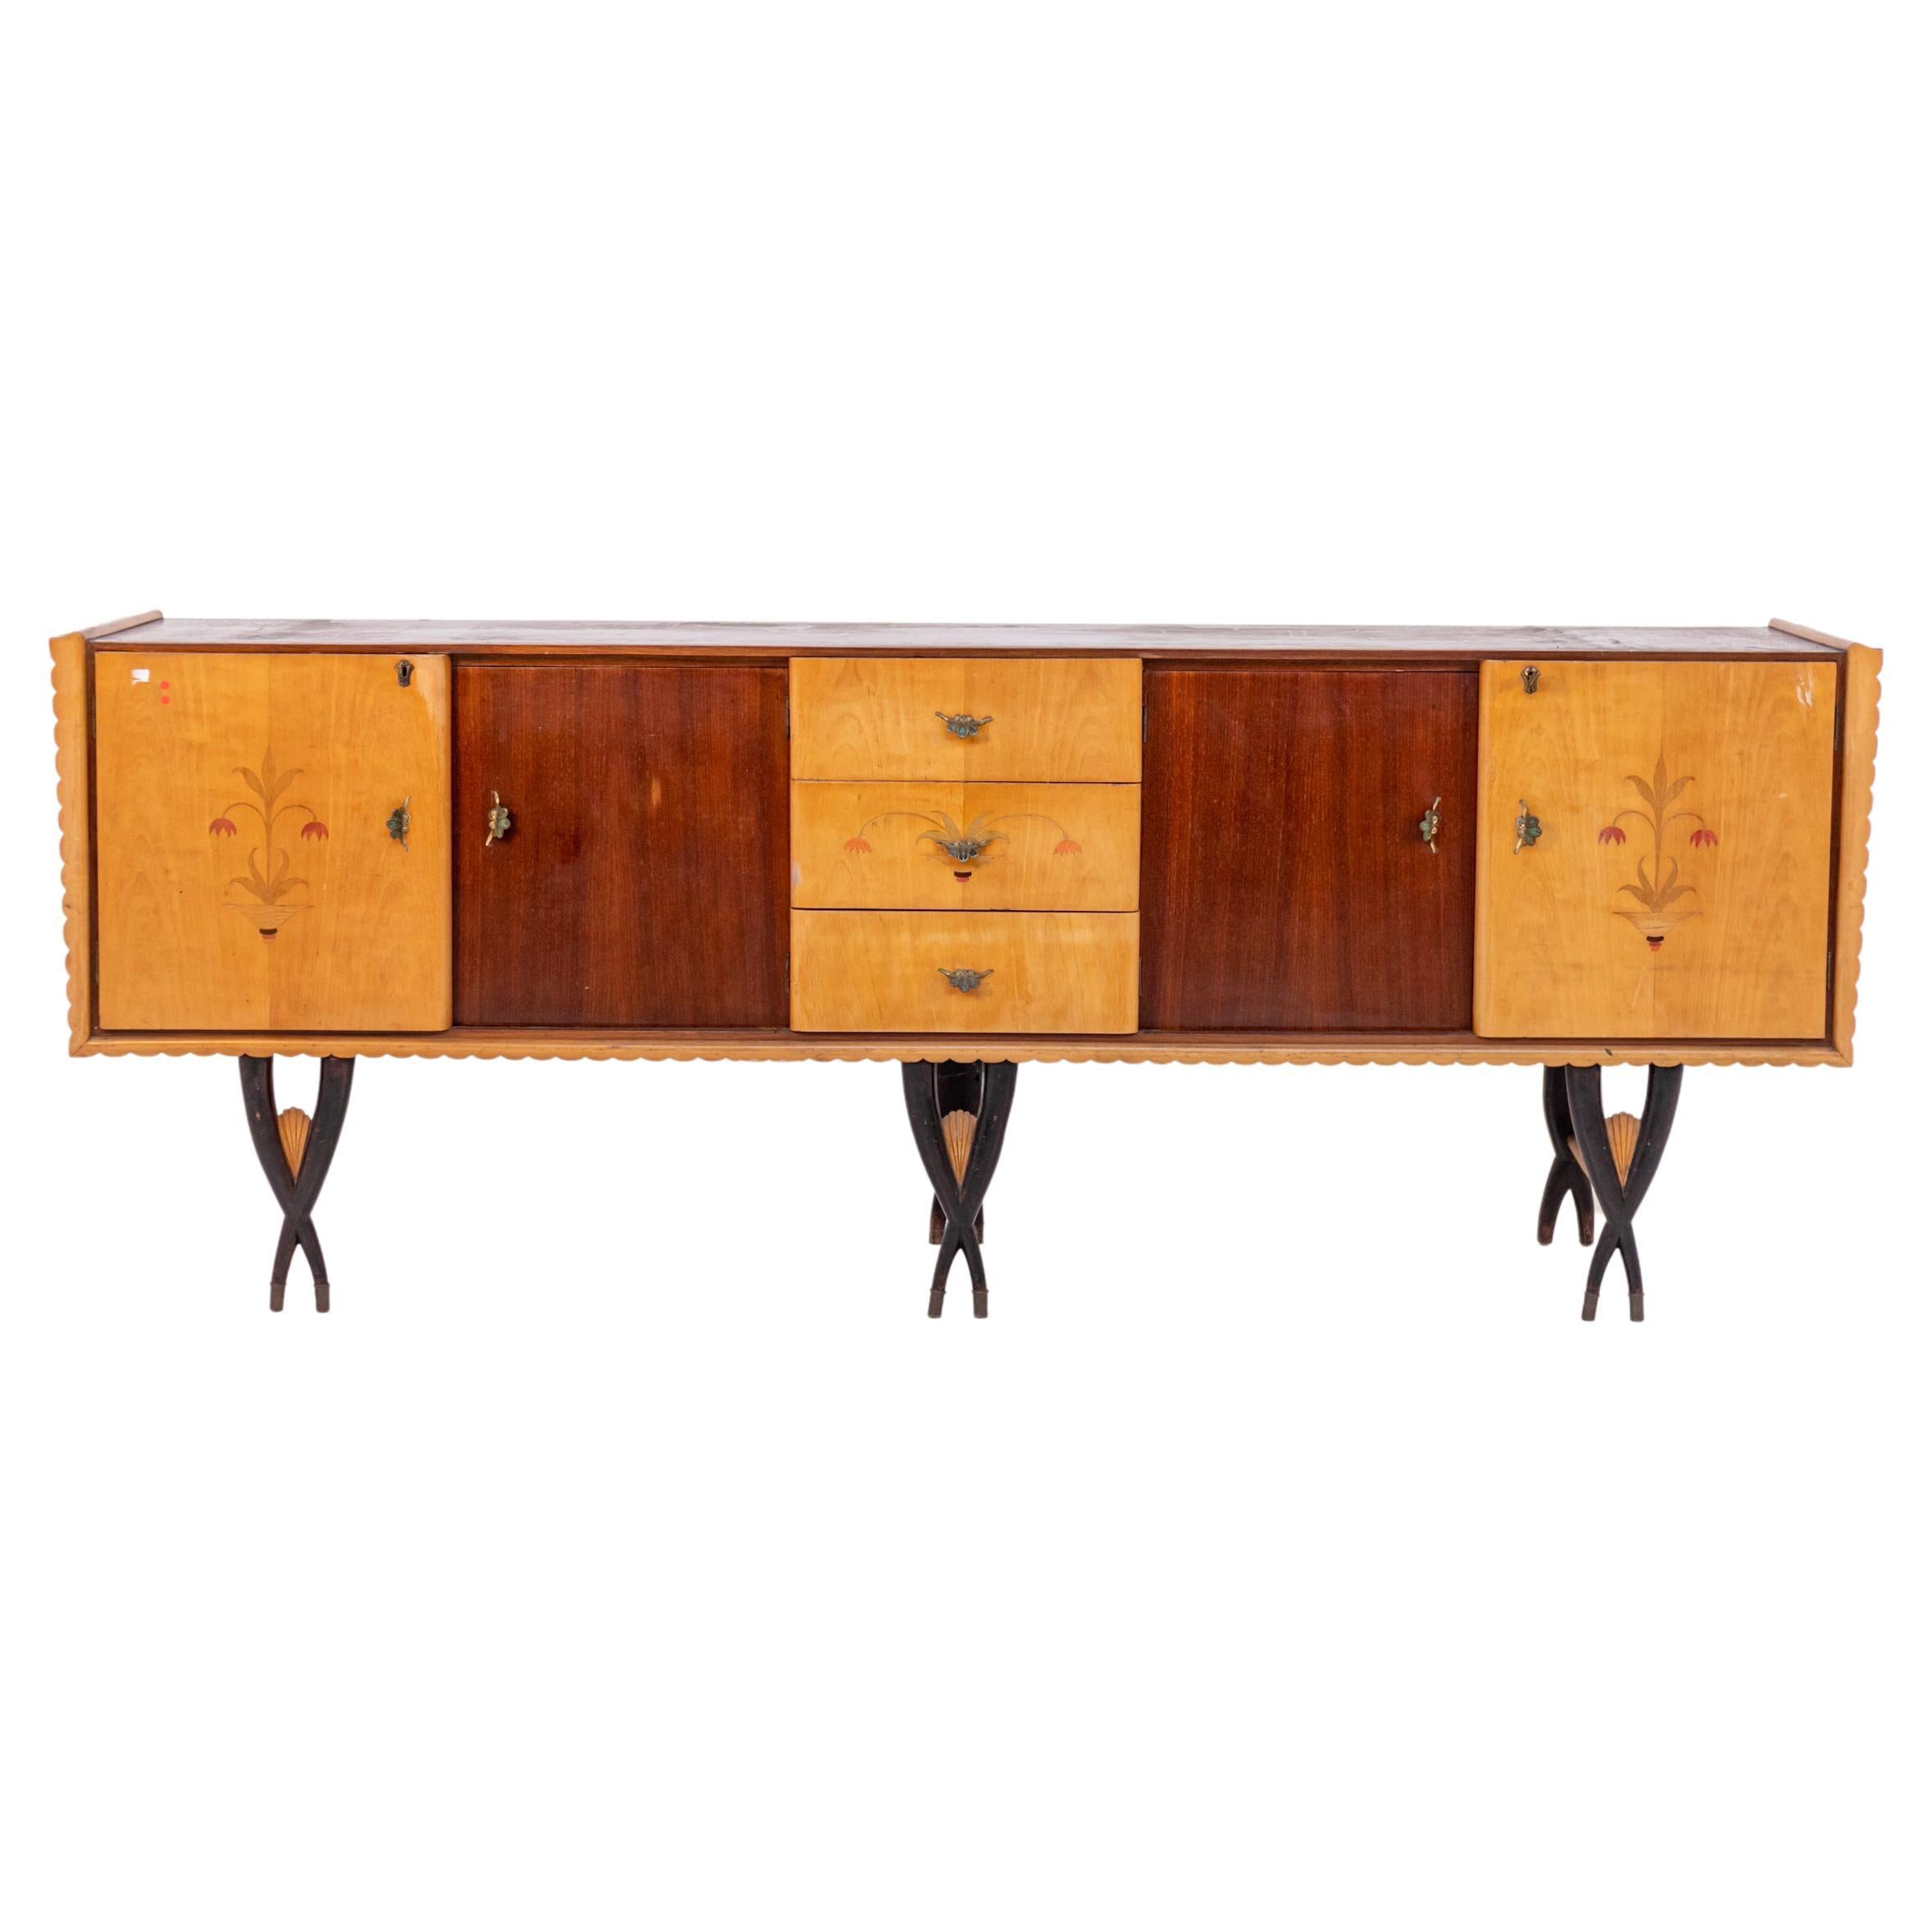 Italian Sideboard Attr. to Paolo Buffa in wood and brass